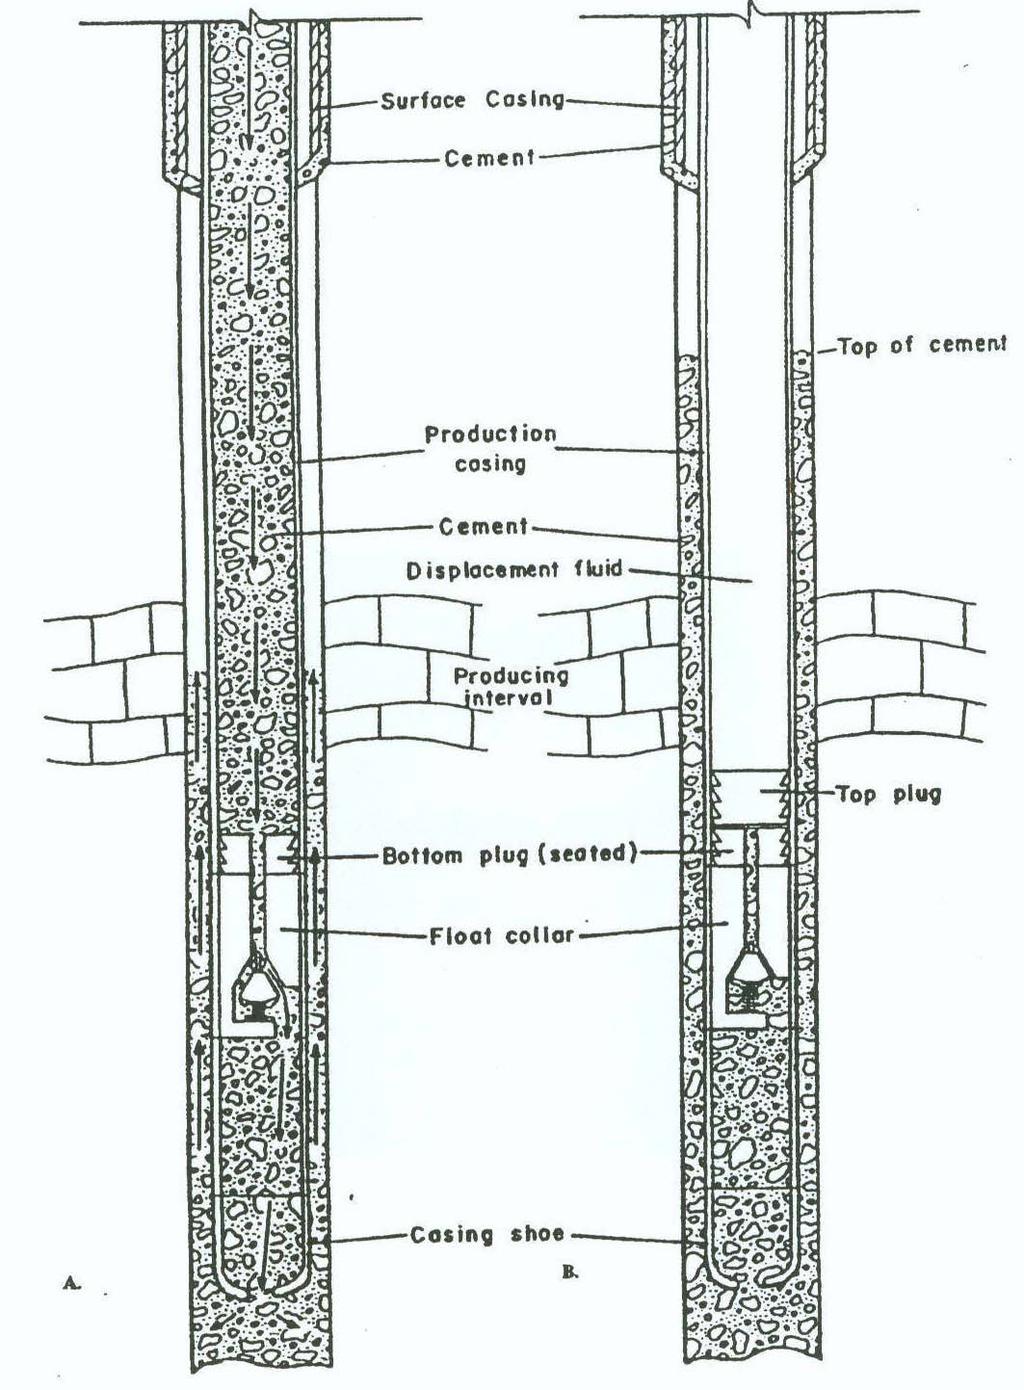 Figure 2 Cementing production casing. A.) Illustrates cement being pumped down the casing. The casing shoe facilitates the insertion of the casing into the hole.